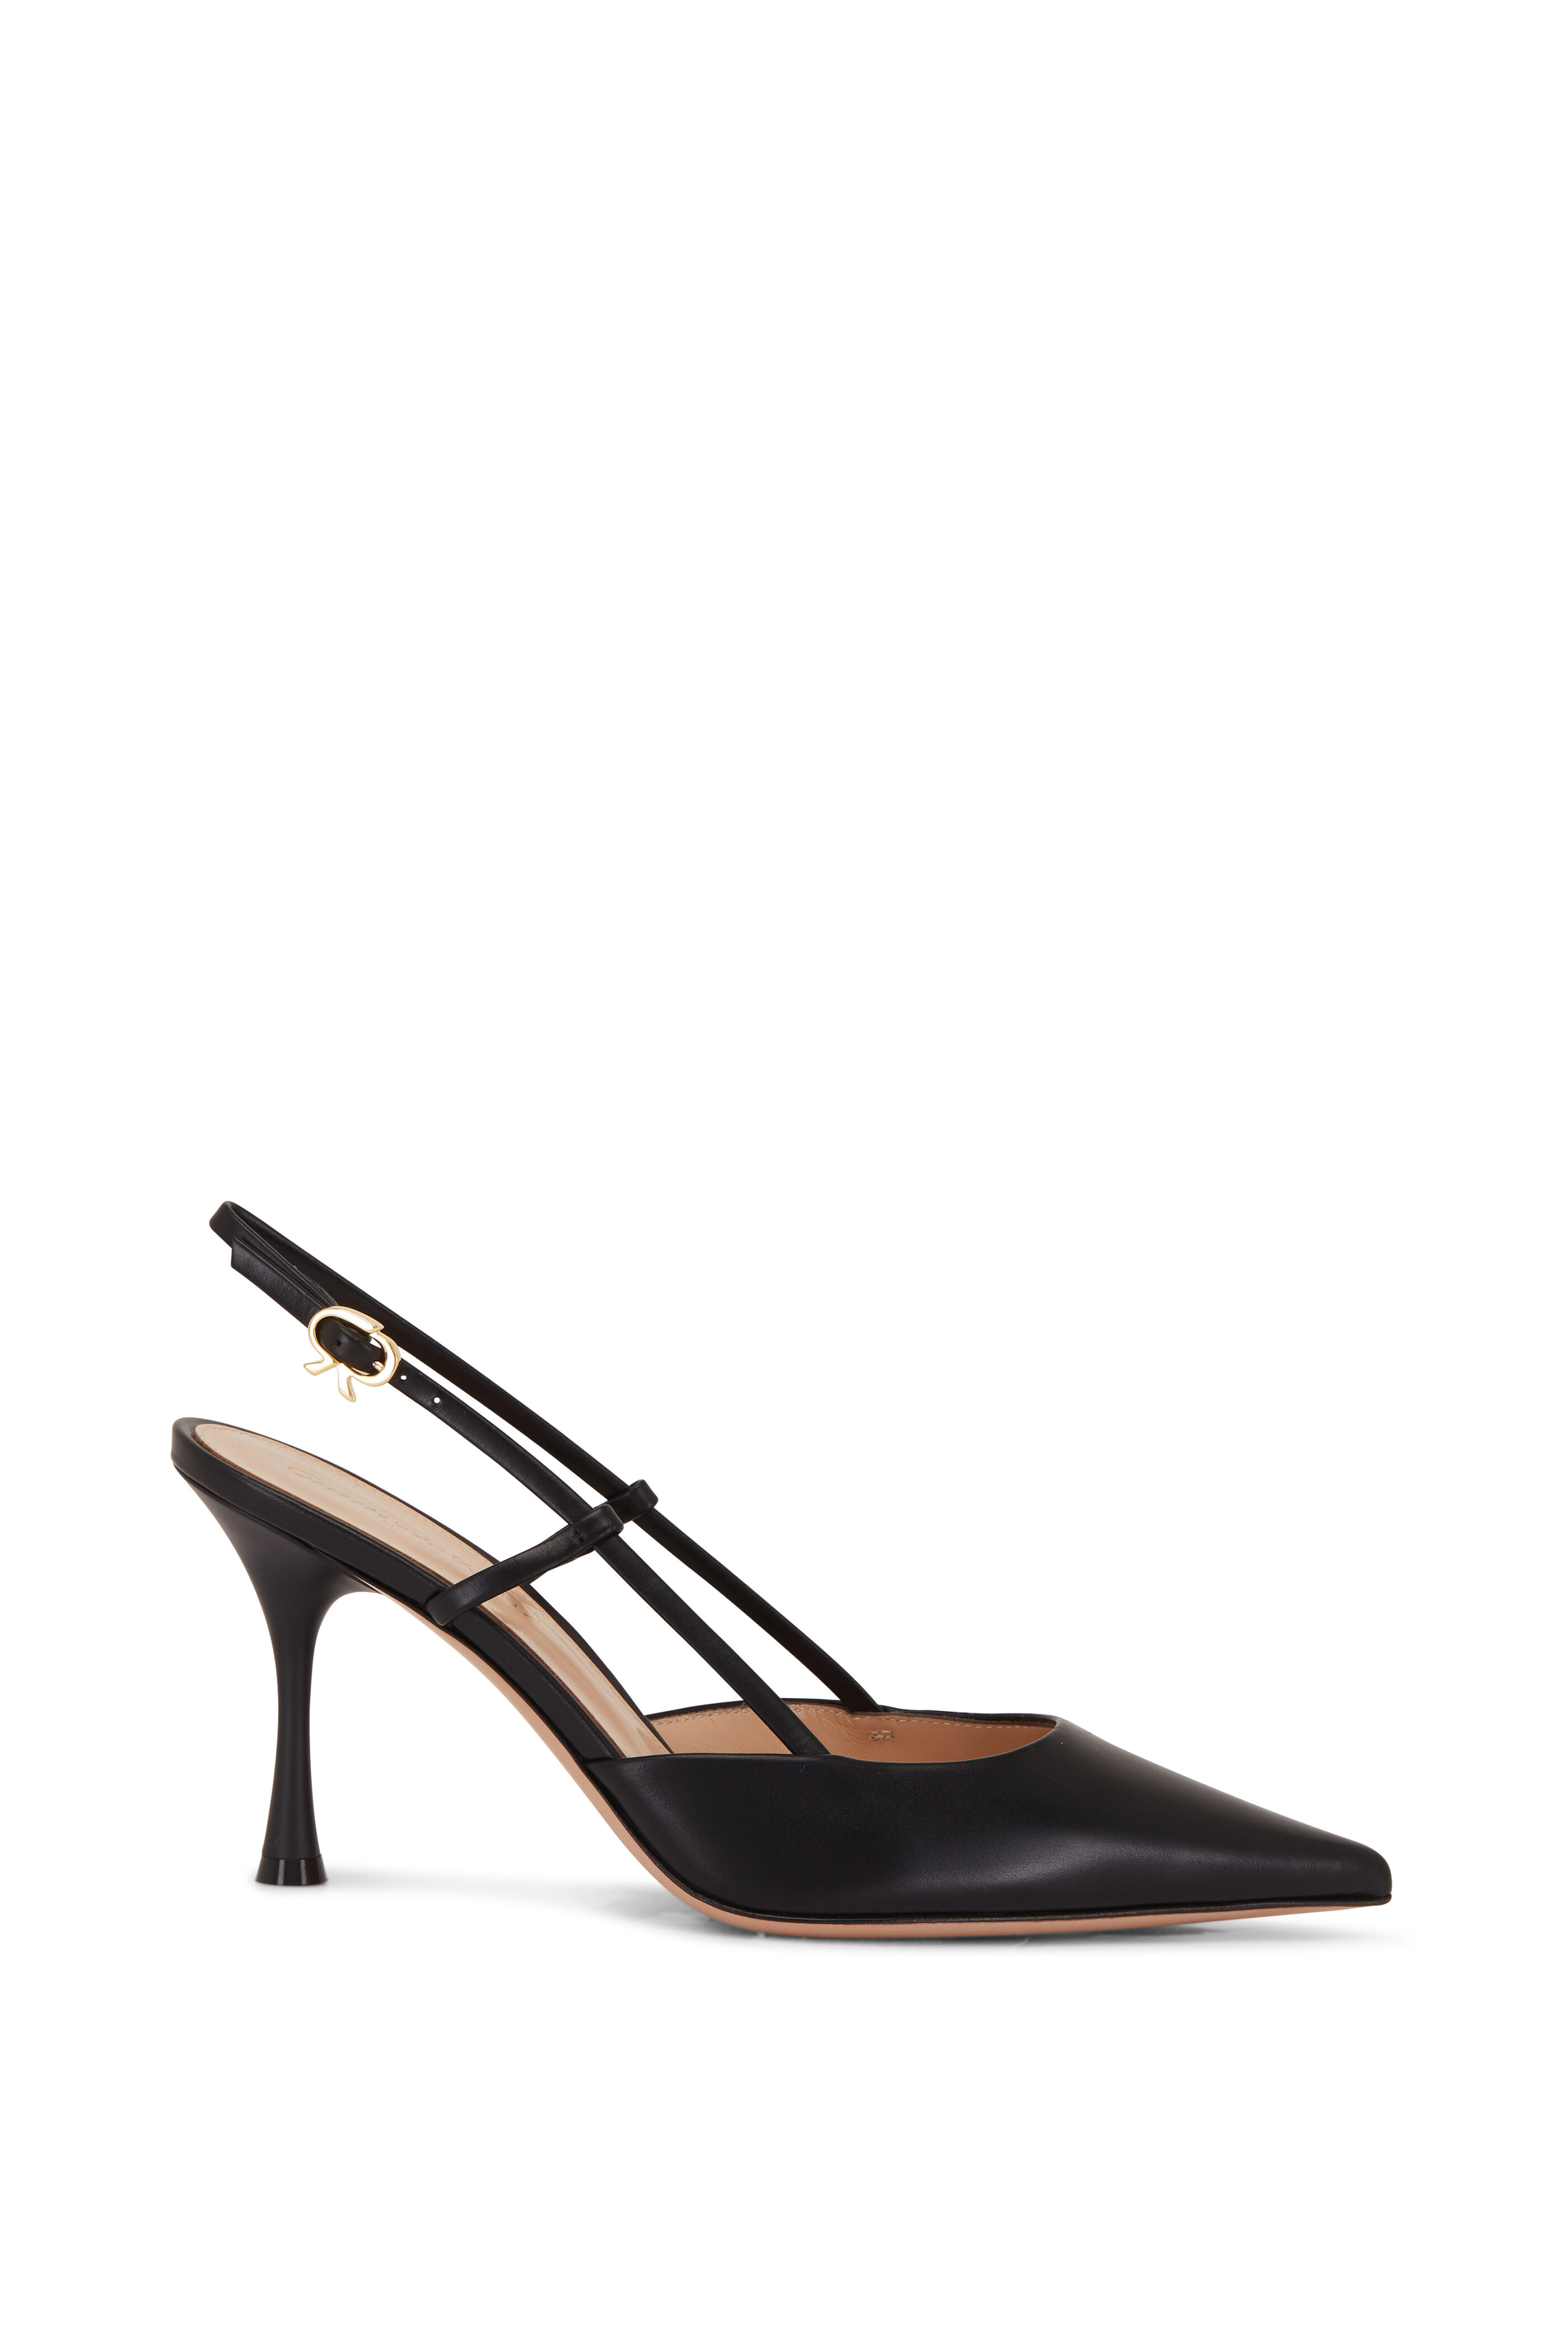 Gianvito Rossi - Ascent Black Leather Slingback | Mitchell Stores